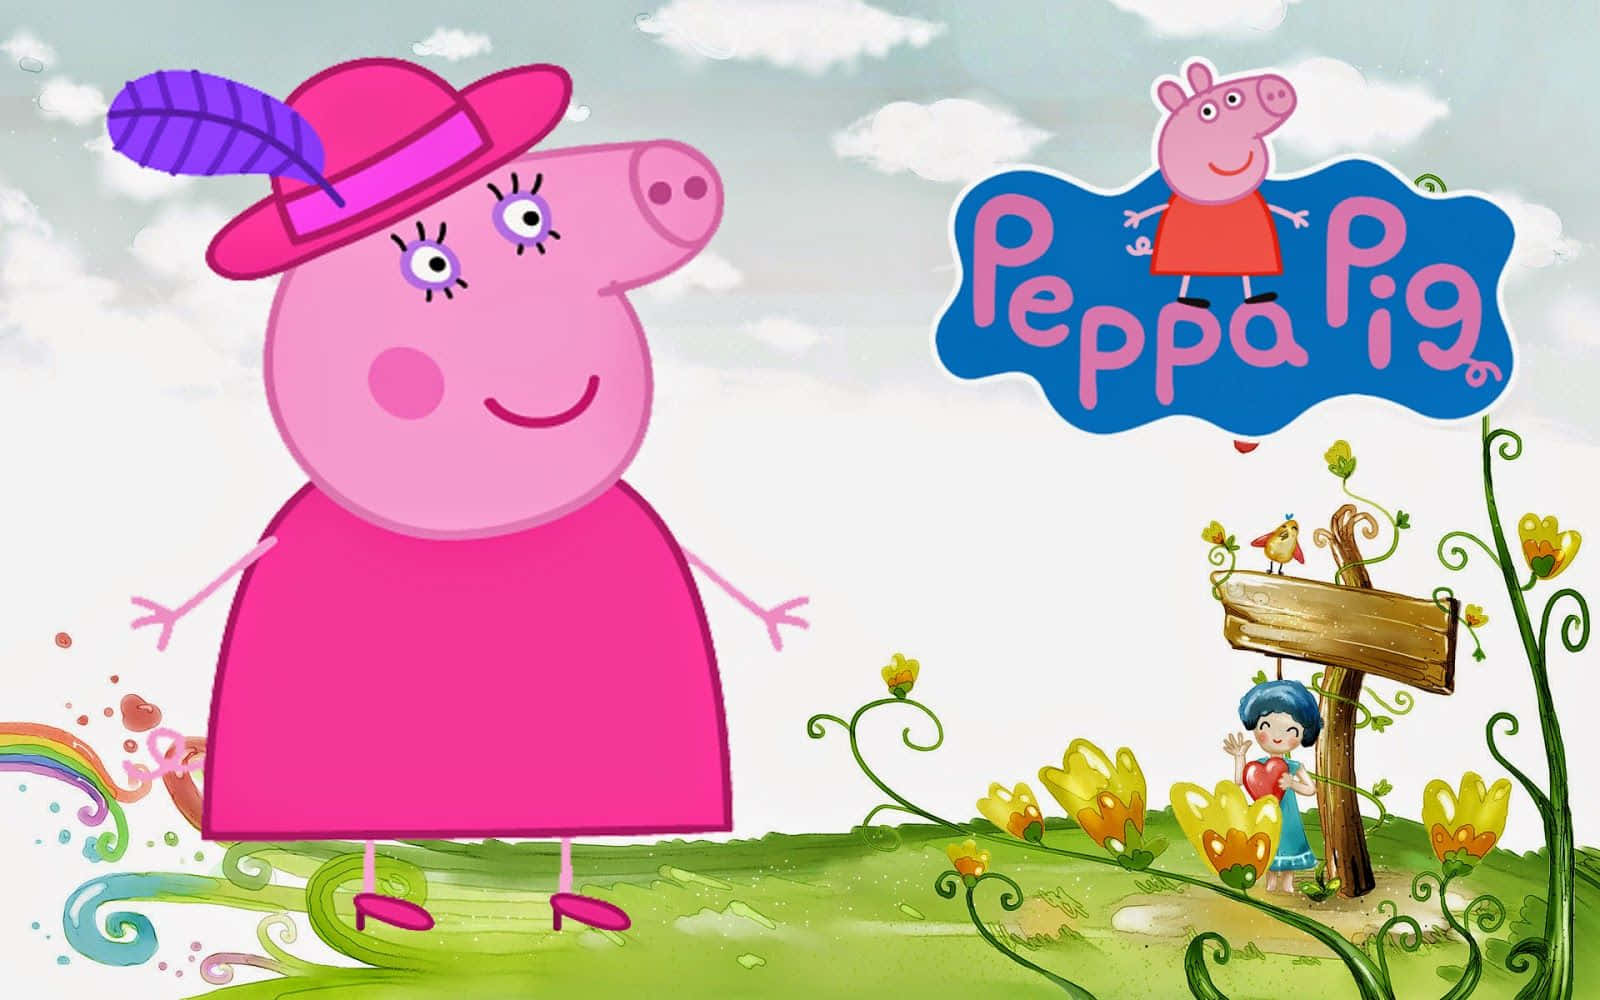 Caption: Bright and Fun Peppa Pig Background